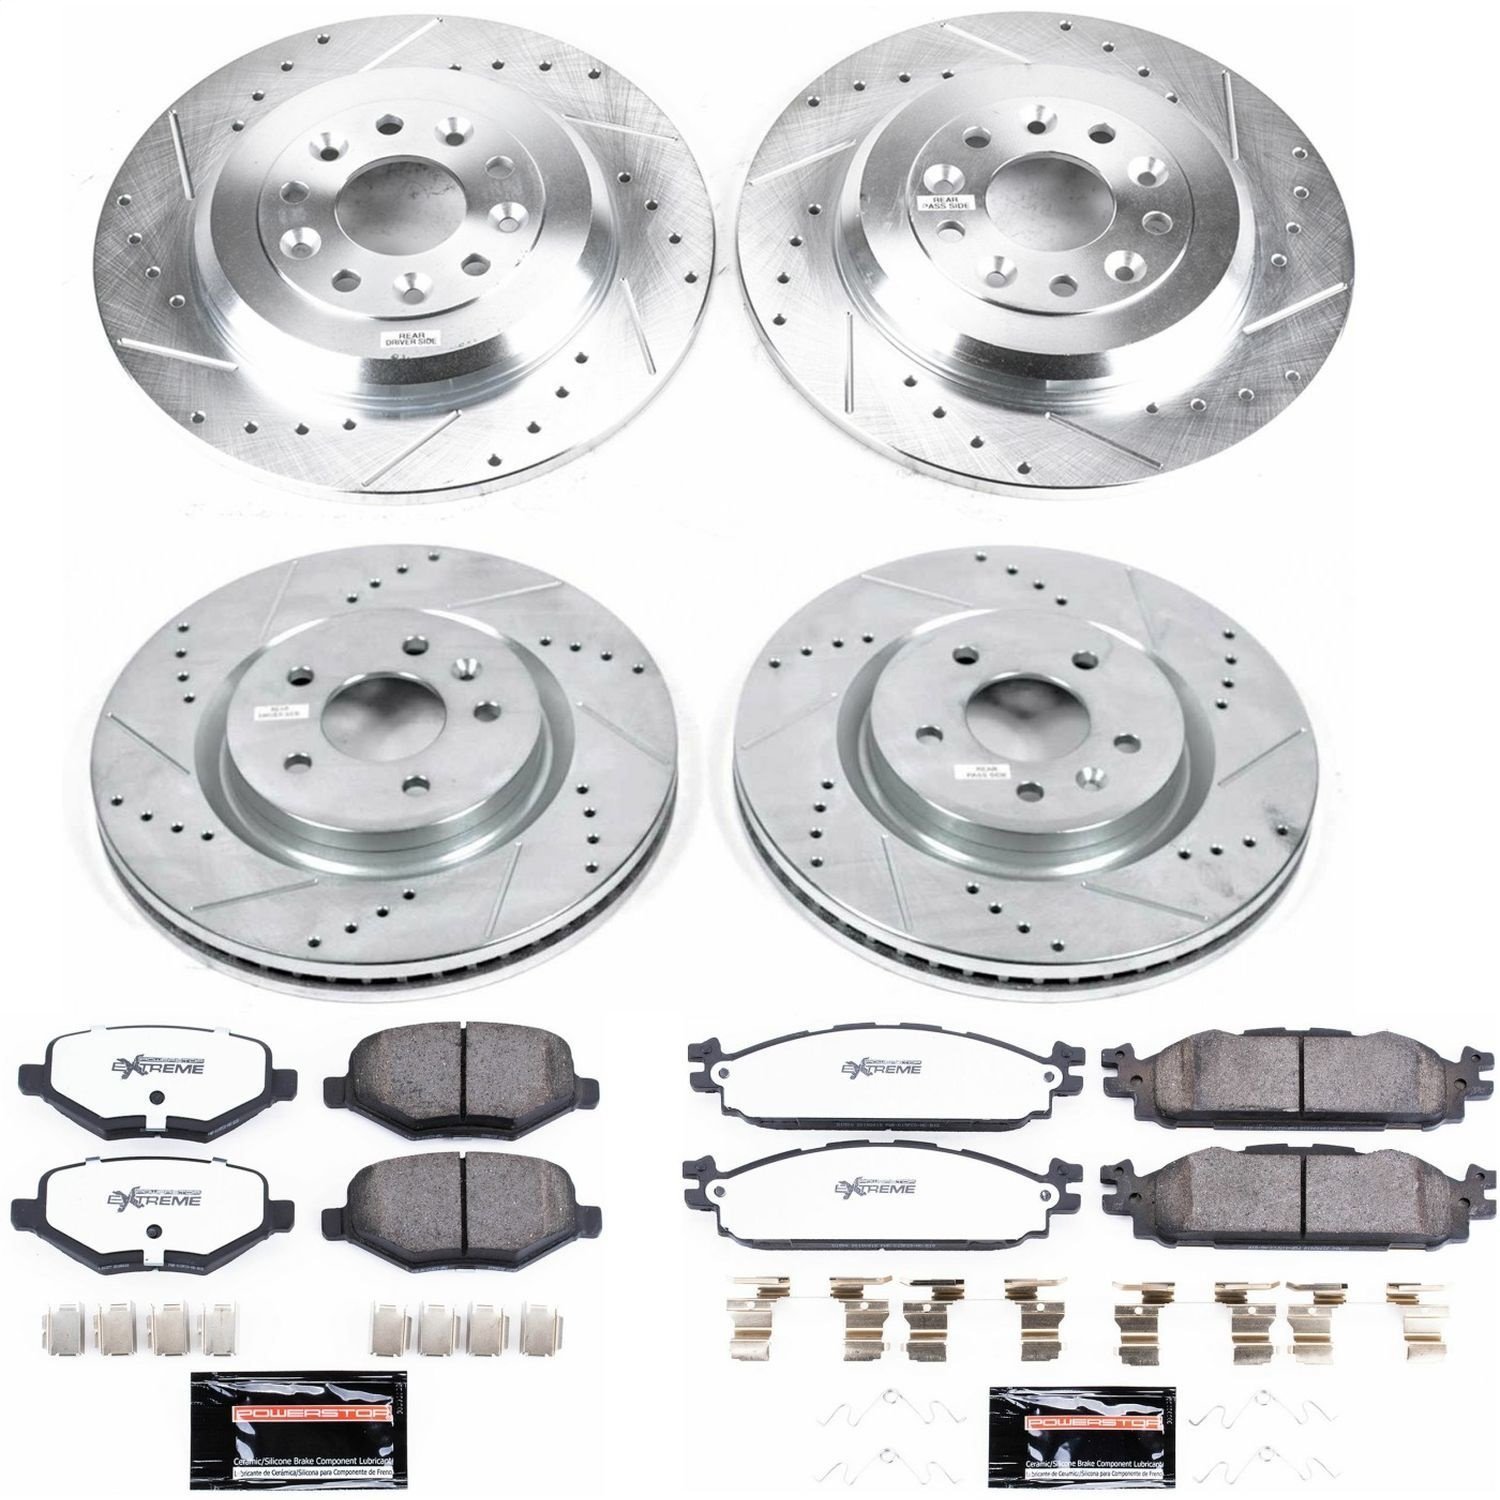 Z36 Truck and Tow Brake Pad and Rotor Kit Fits Select Late Model Ford, Lincoln Models [Front and Rear]